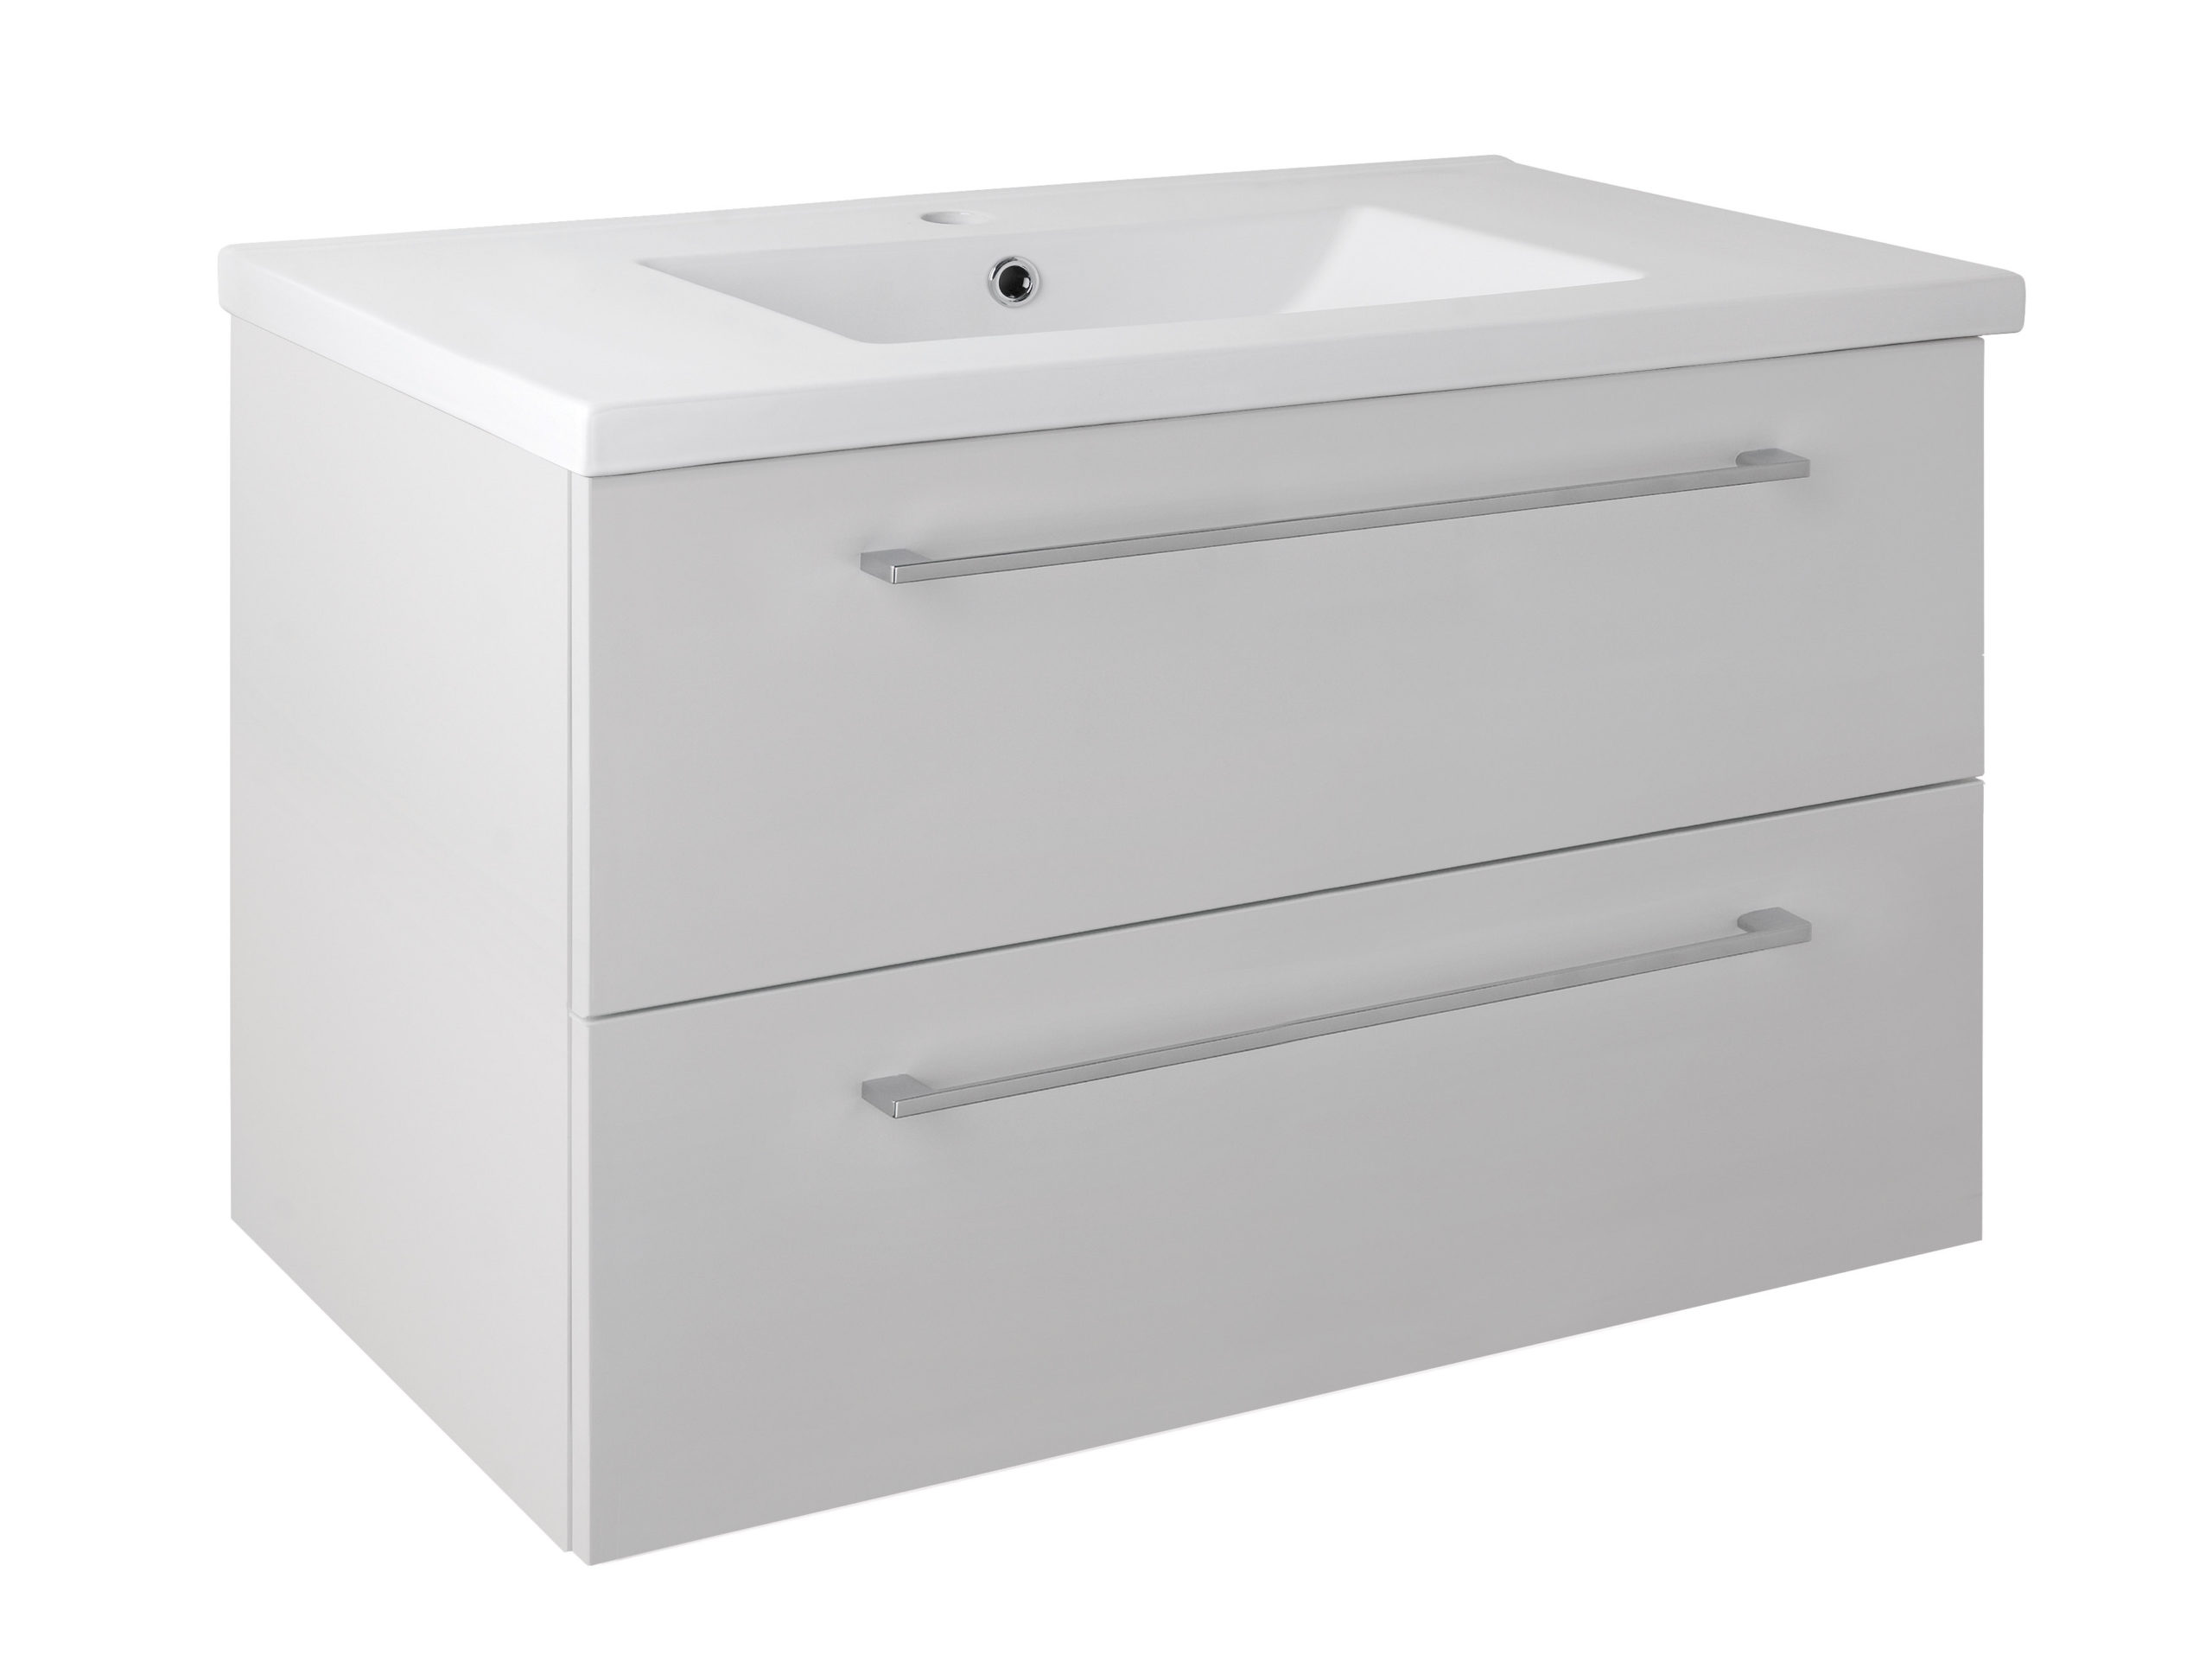 Pace 800 Wall Mounted Unit with Drawers and Basin - White - Just Taps